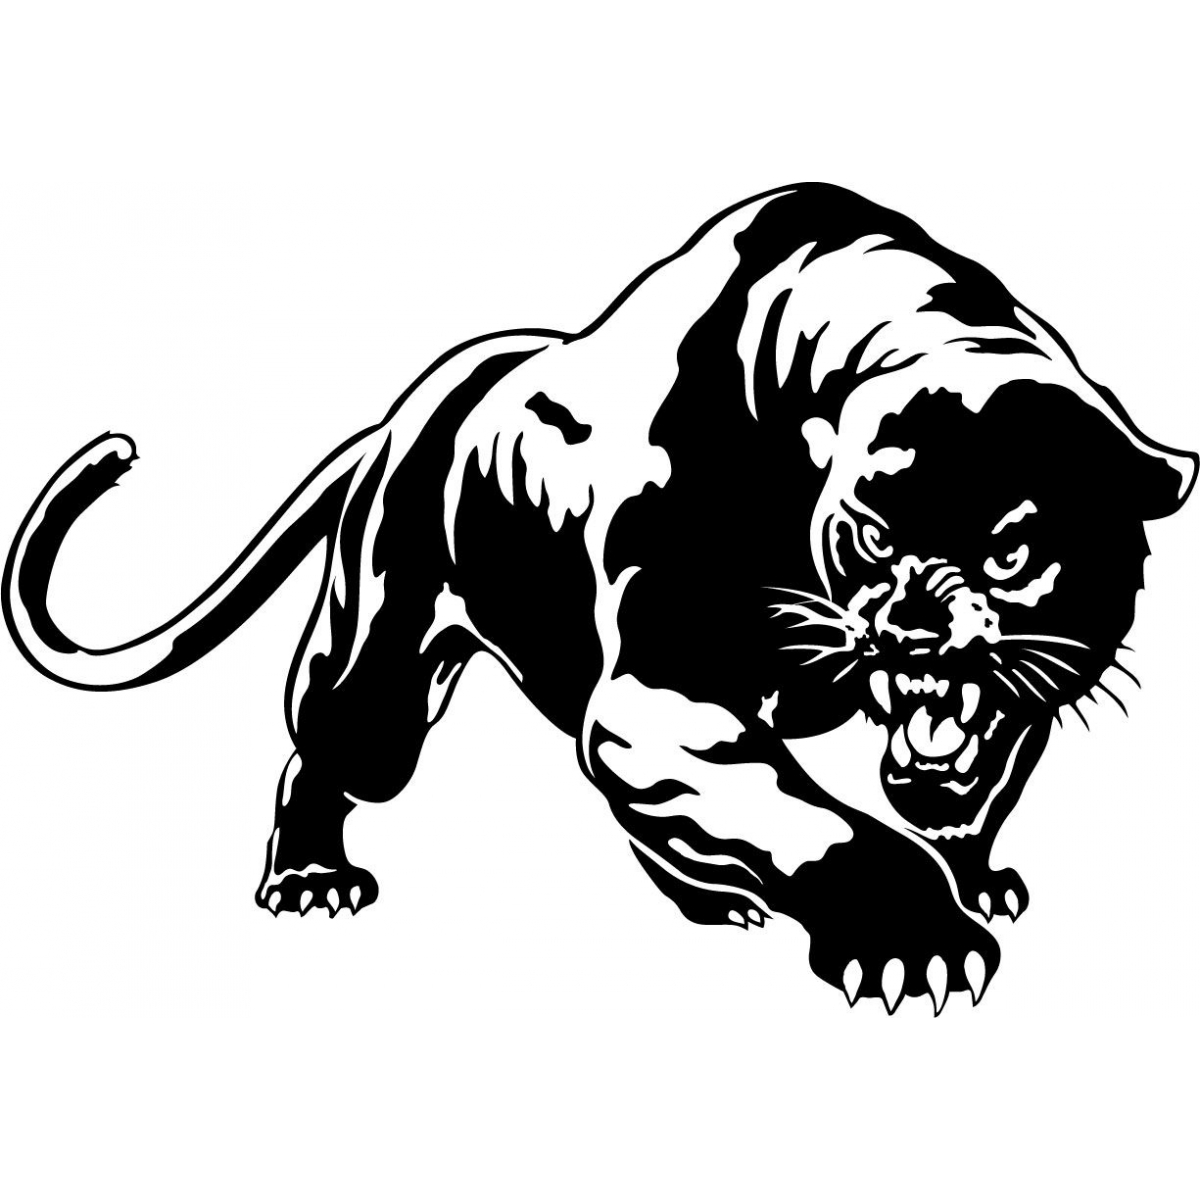 20  Images For Panther Silhouette Clipart   Free Clip Art Images